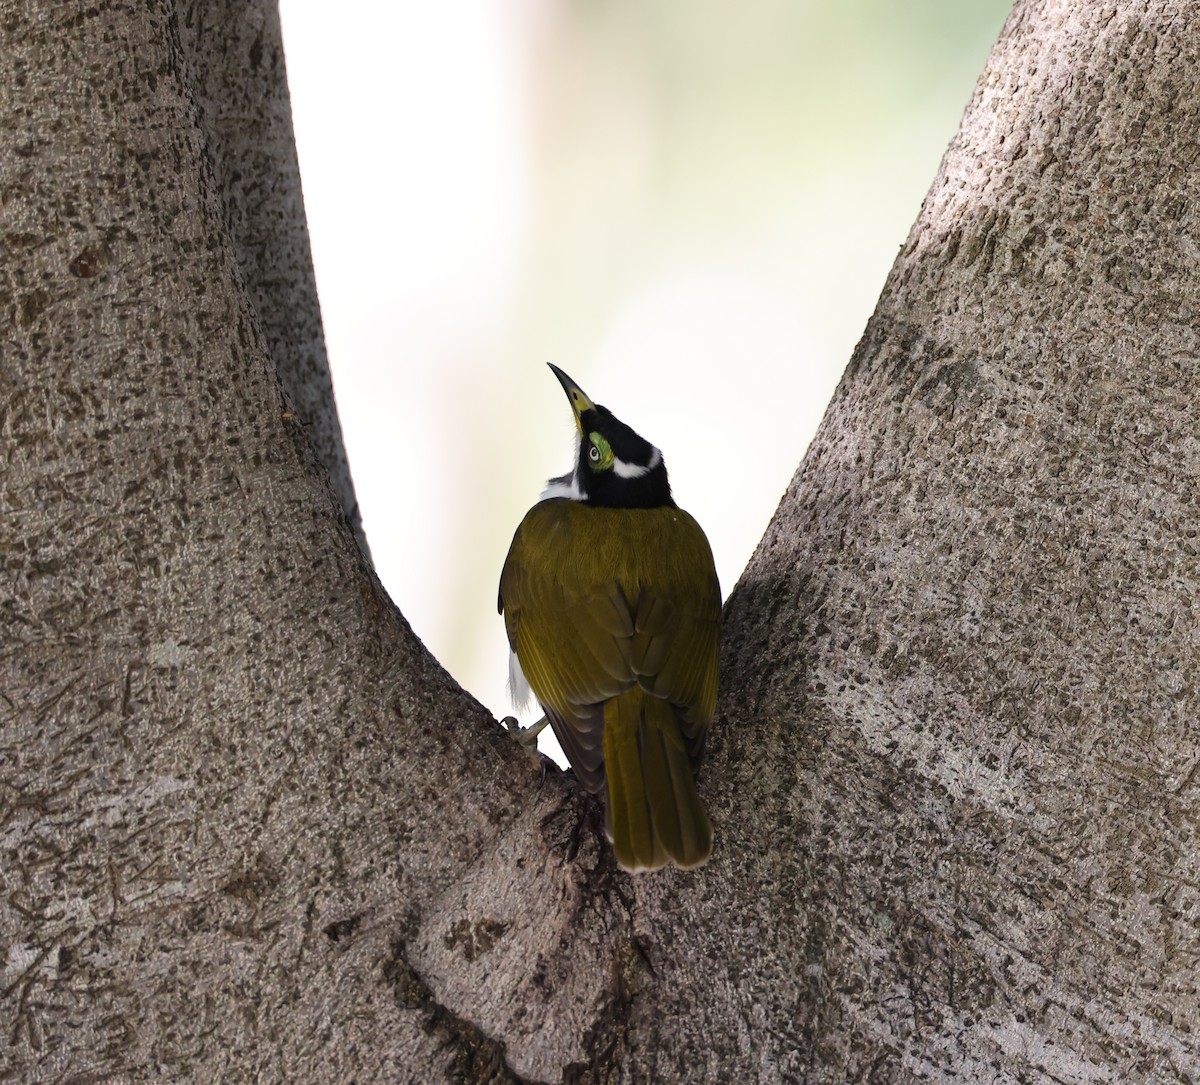 Blue-faced Honeyeater - Andy Gee